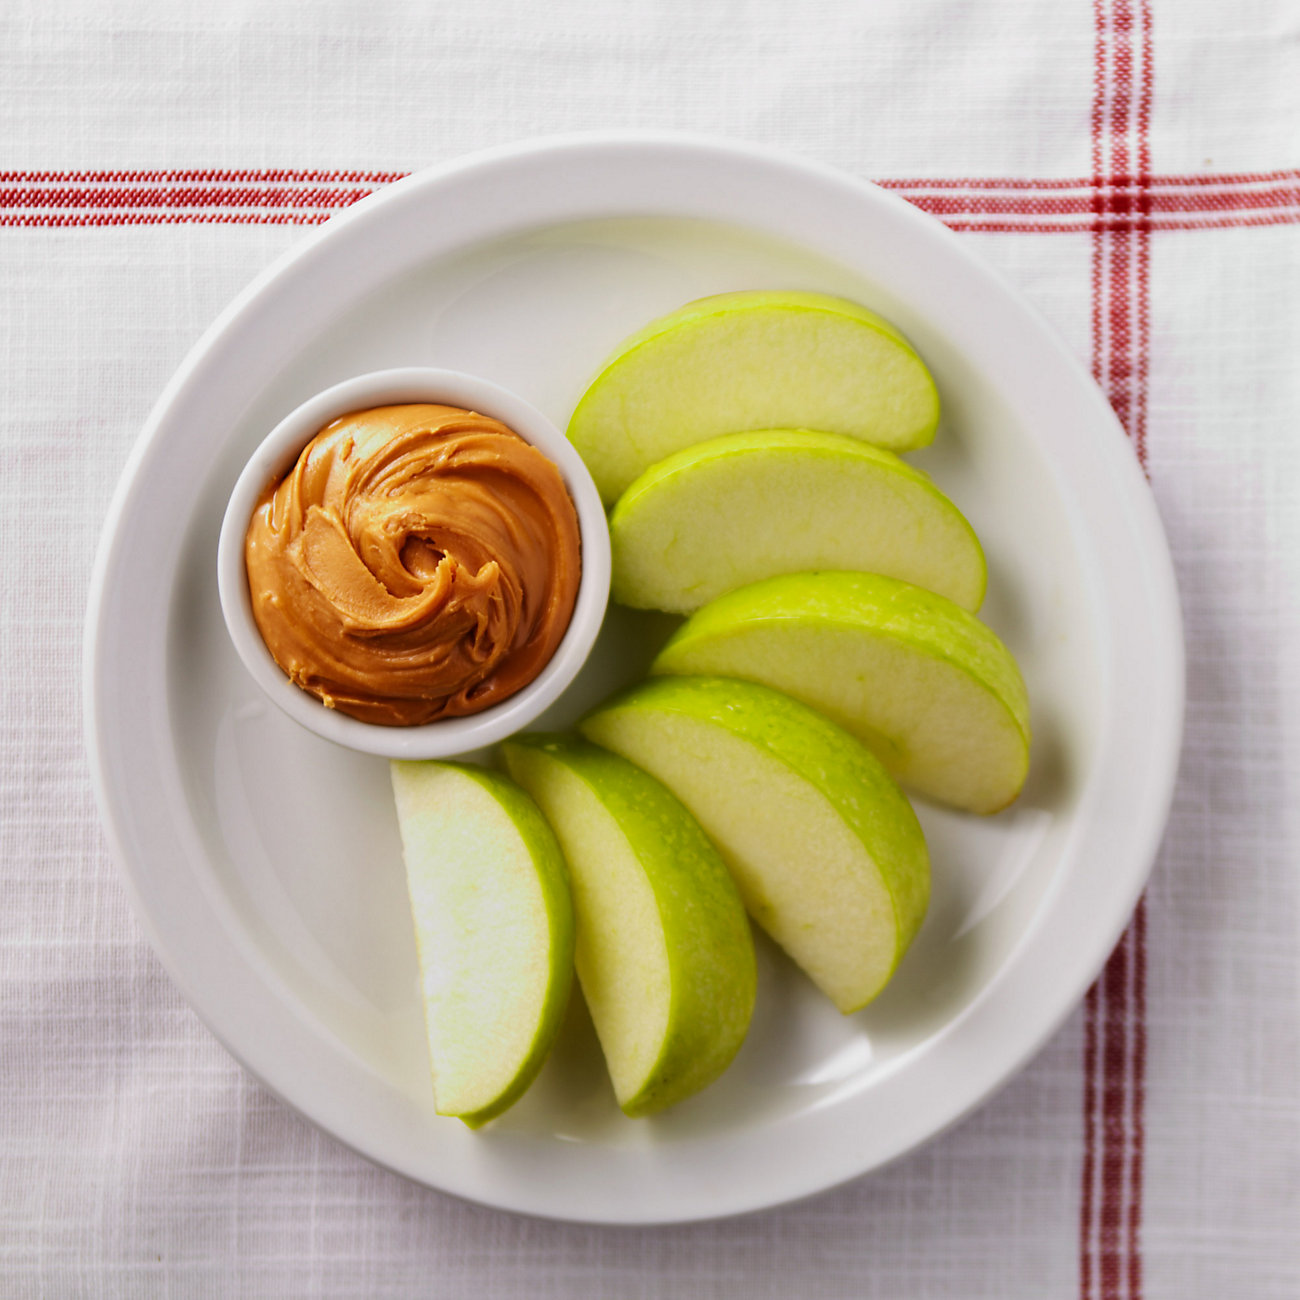 Apple Slices with Peanut Butter Snack Recipe from H-E-B